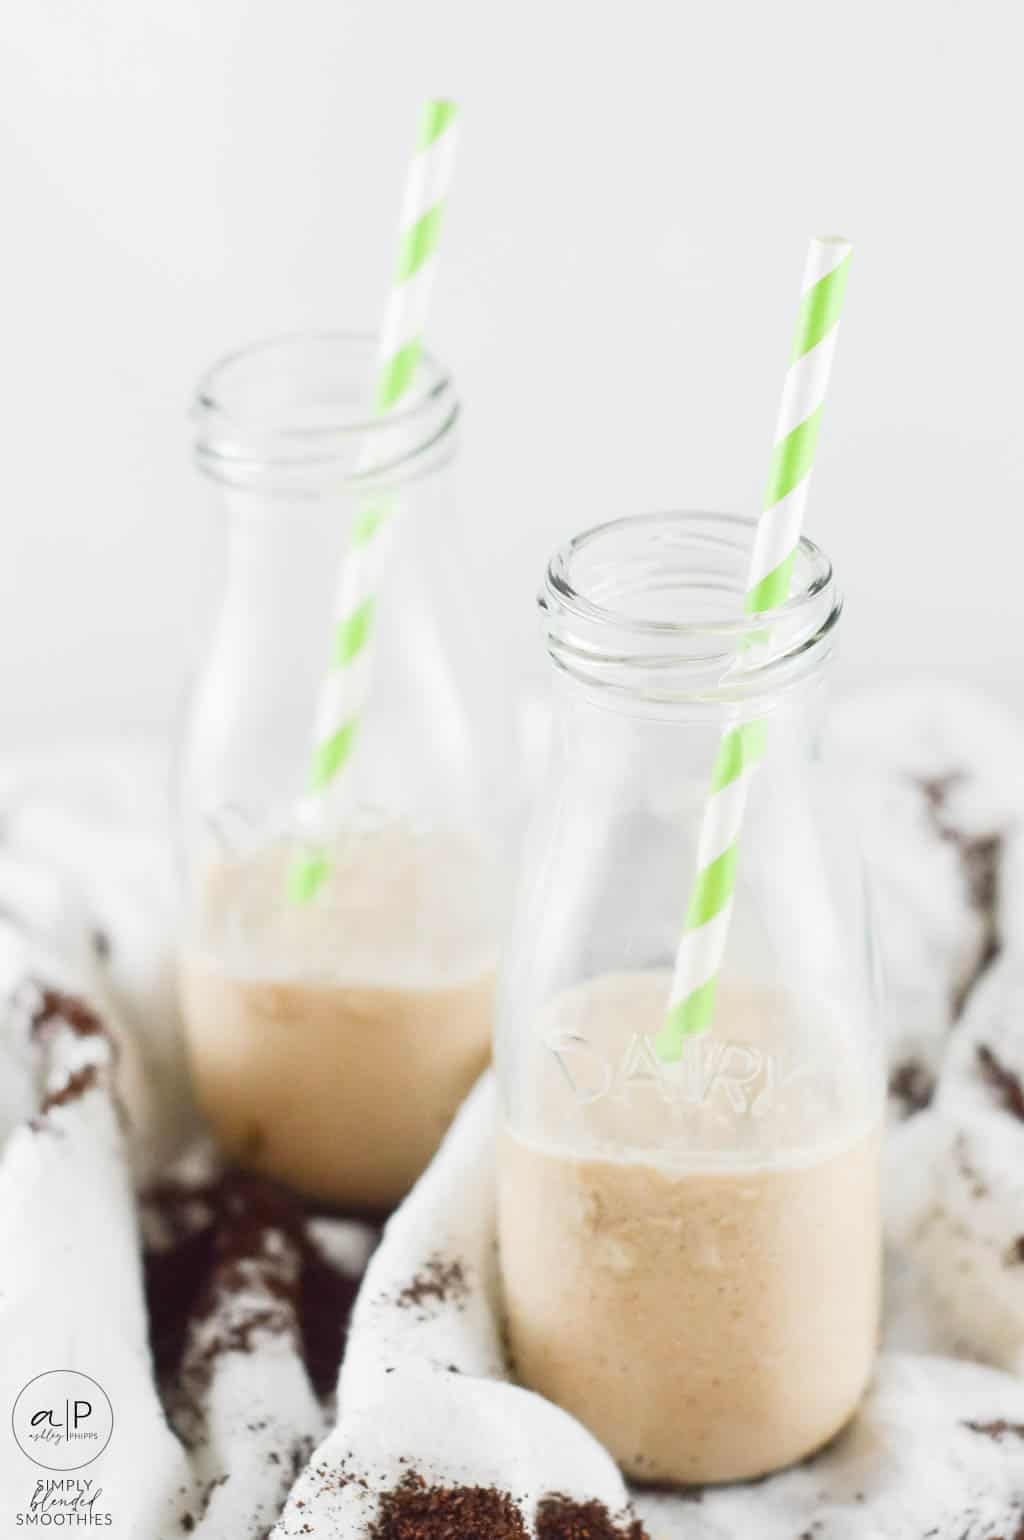 Smoothie Made With Coffee To Start Your Morning Off Right